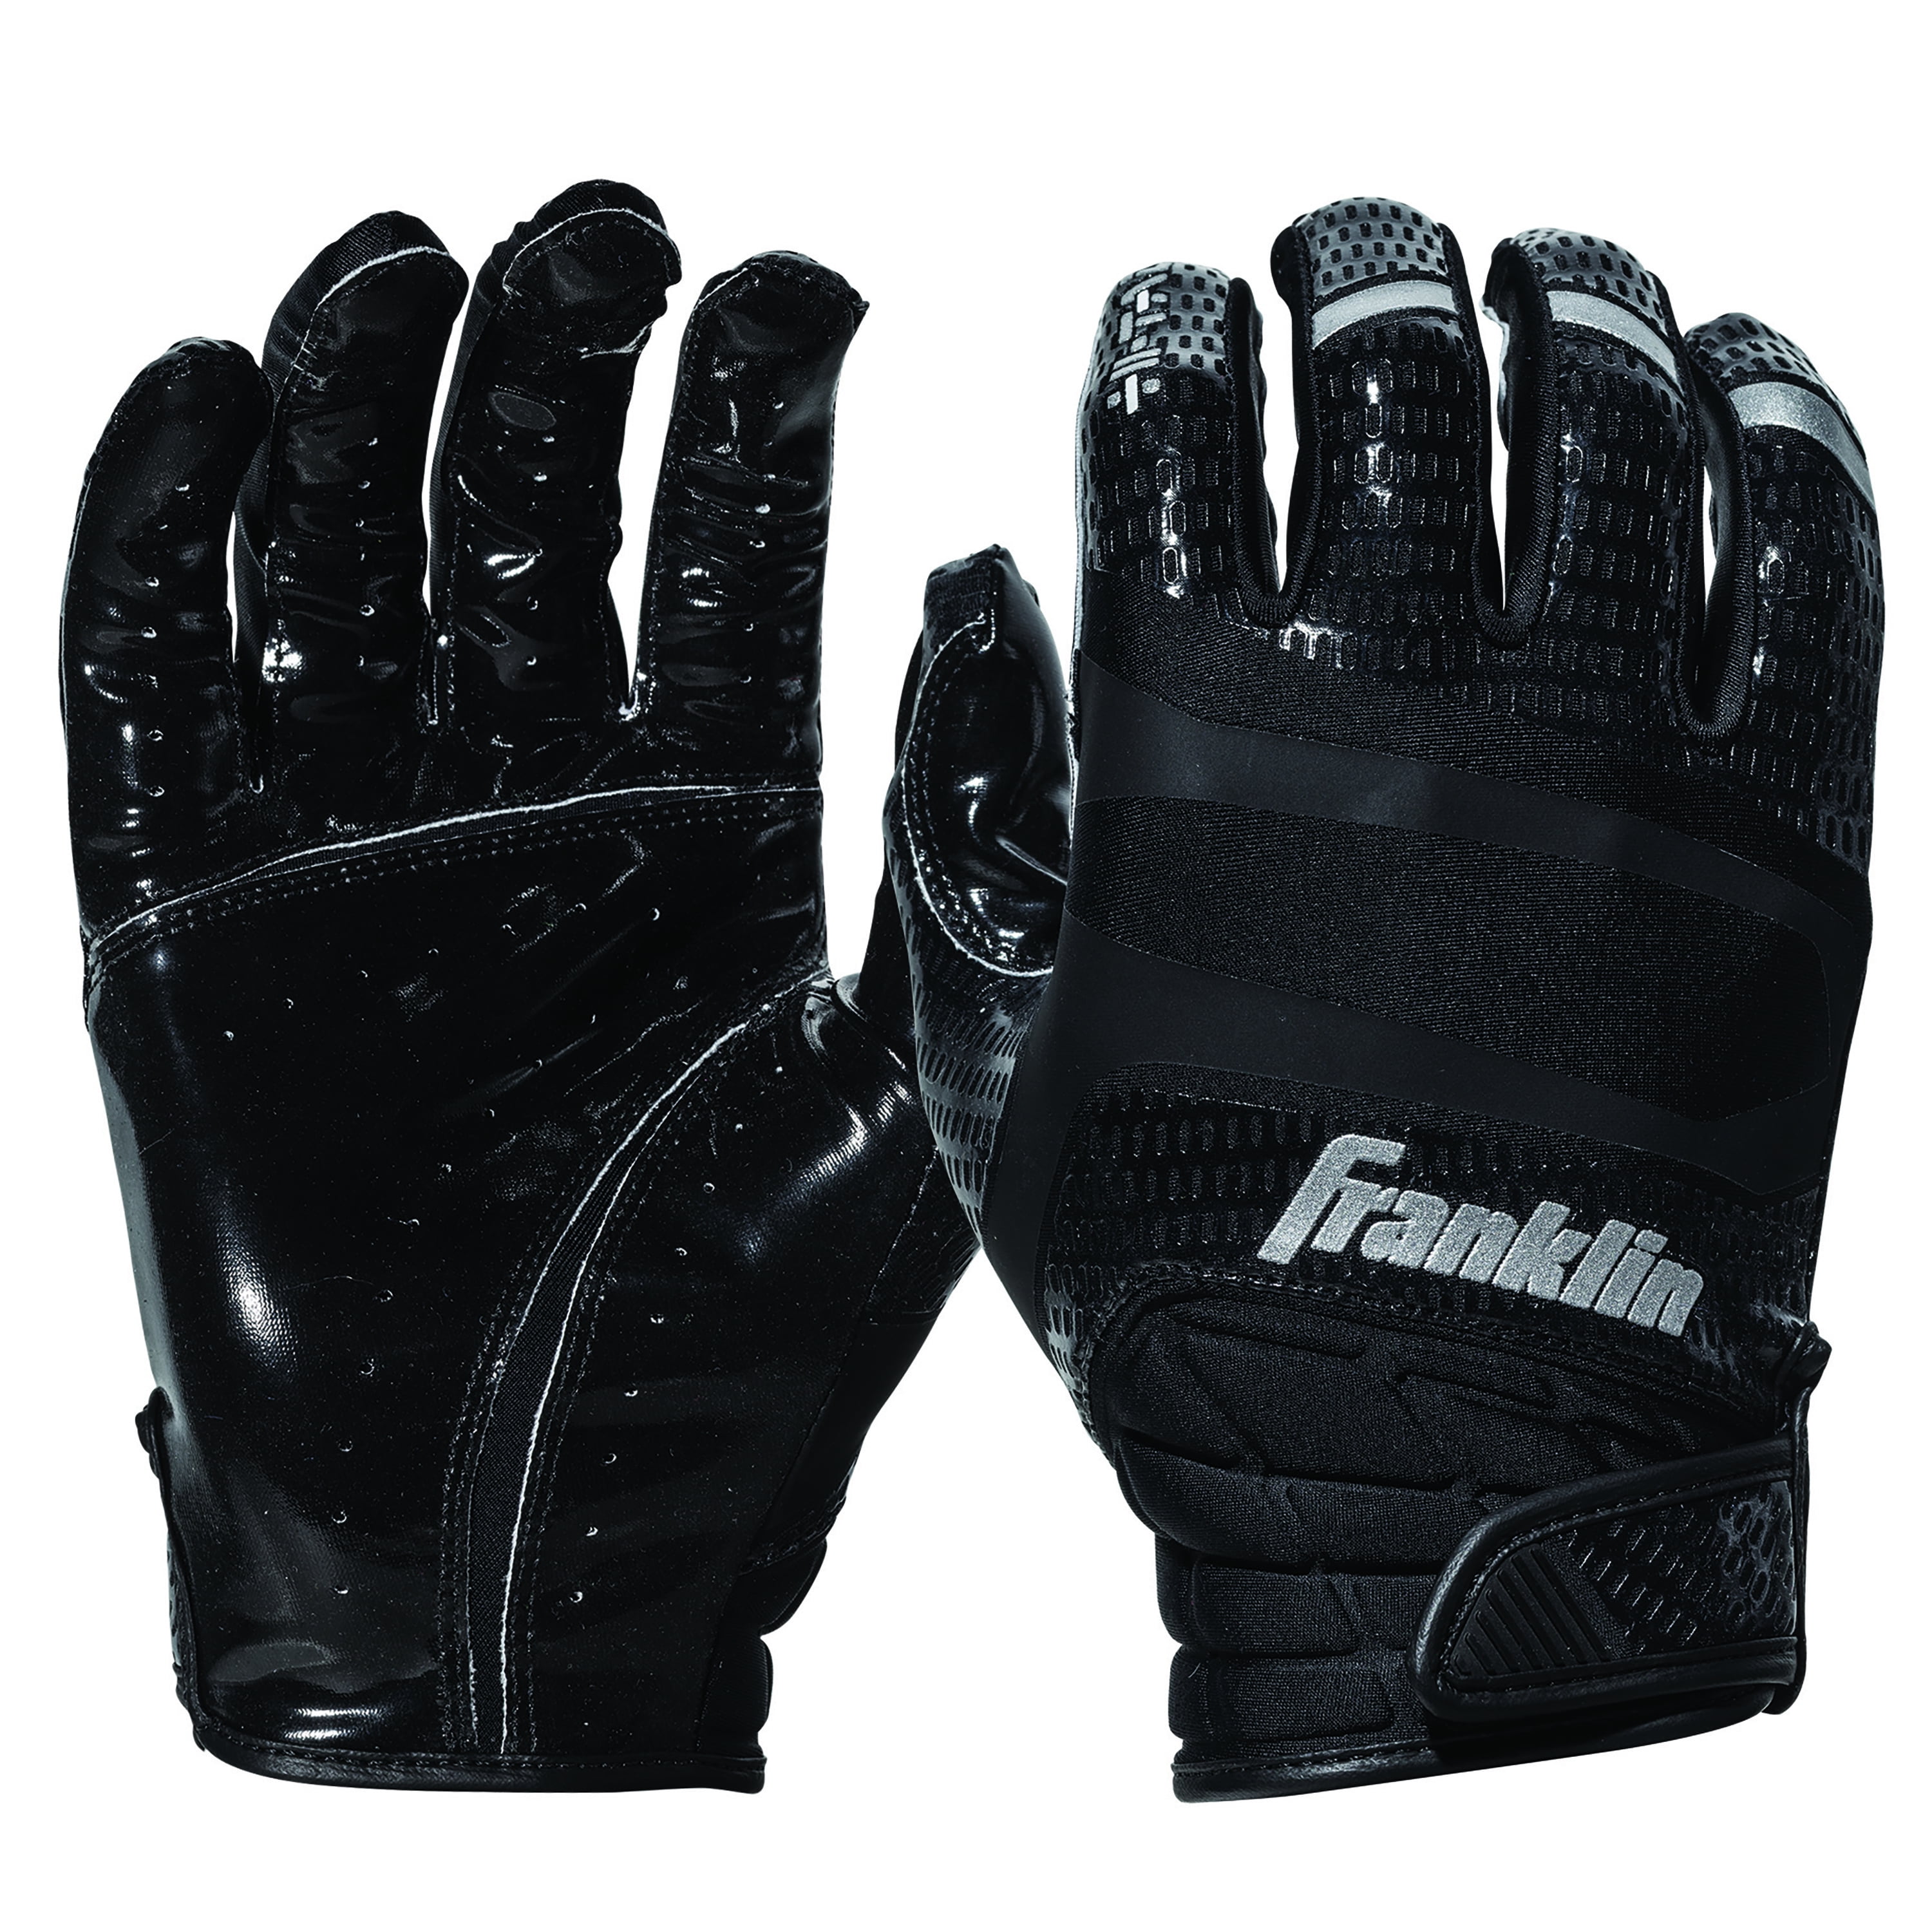 Franklin Sports Football Receiver Gloves Hi-Tack SFIA Approved Adult and Youth Football Receiver Gloves Extra-Grip Premium Football Gloves for All Ages